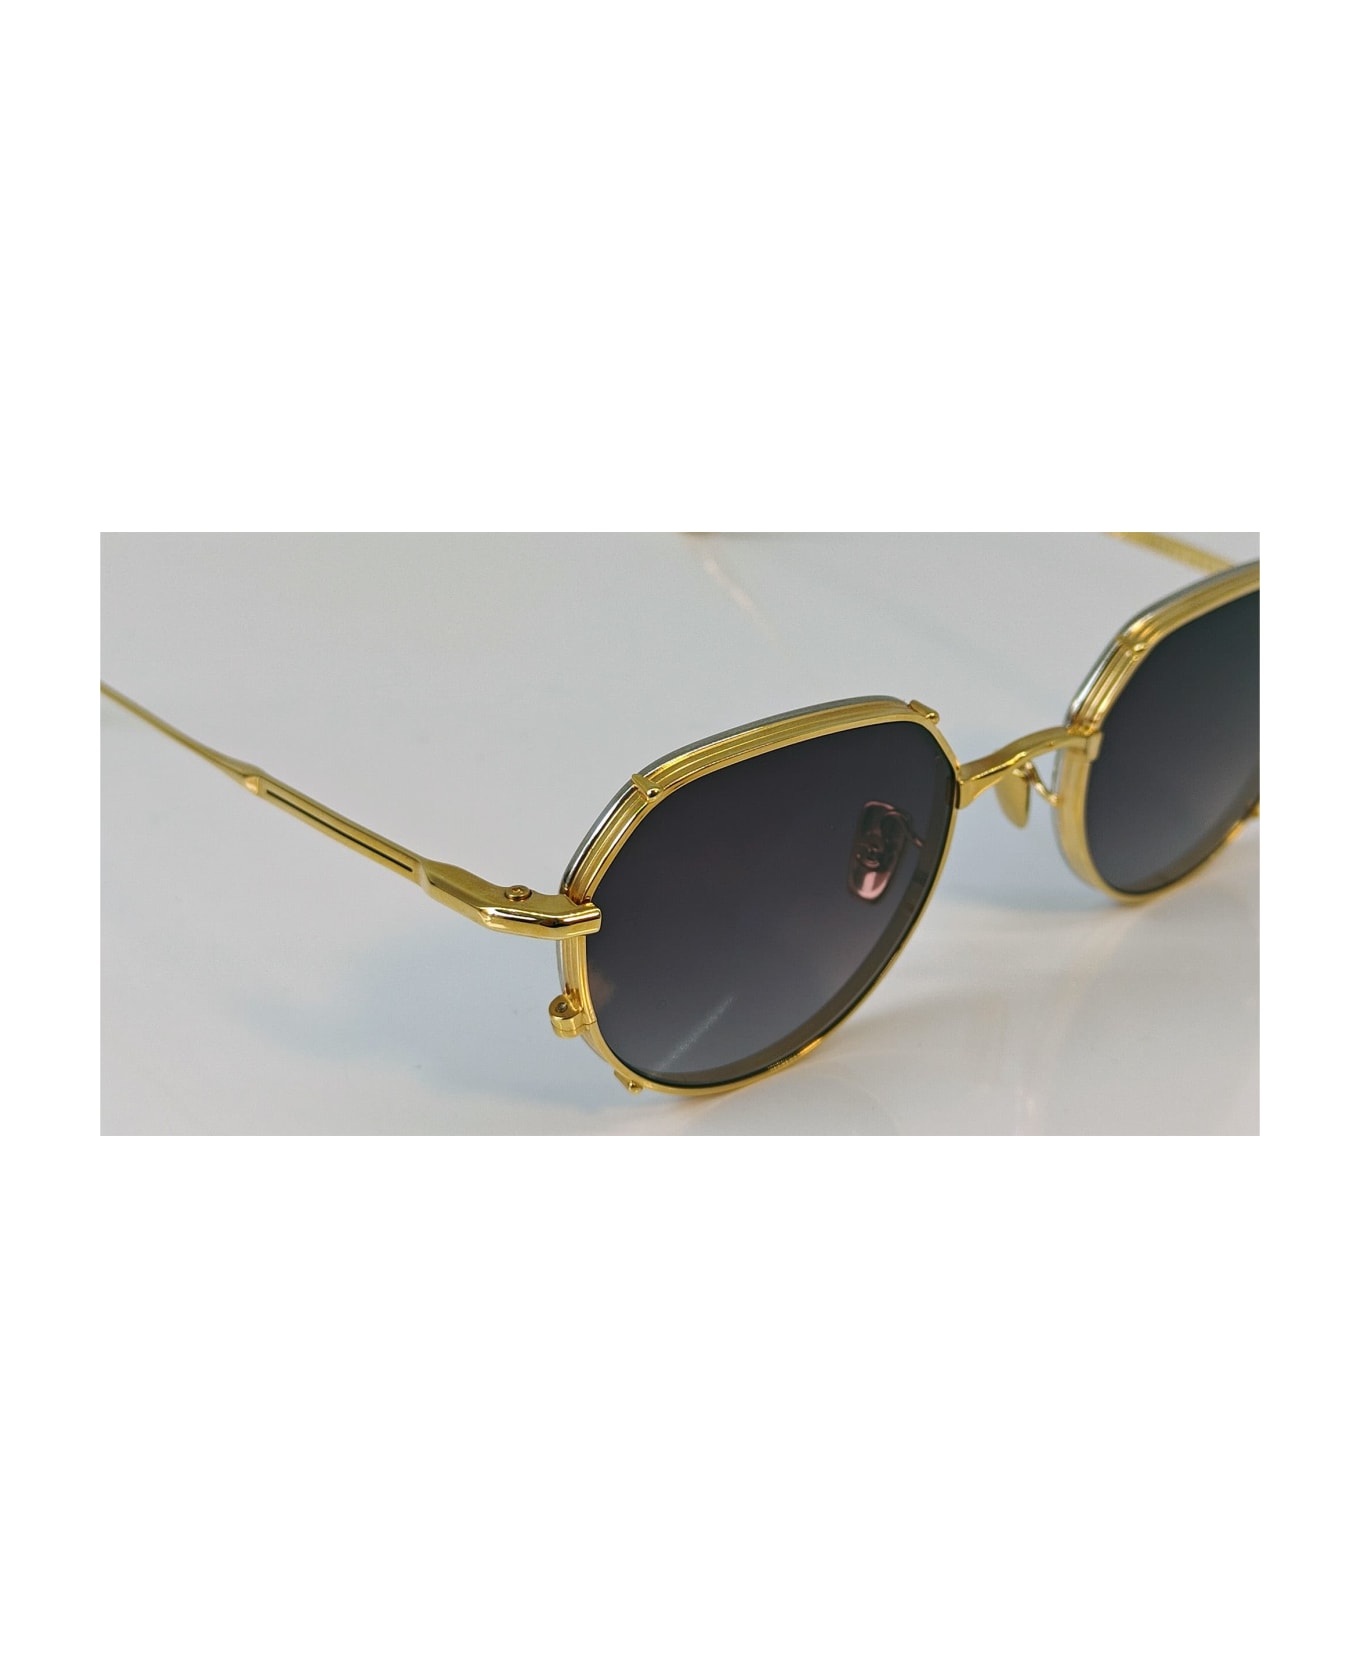 Jacques Marie Mage Hartana - Gold 2 Sunglasses - gold/silver サングラス